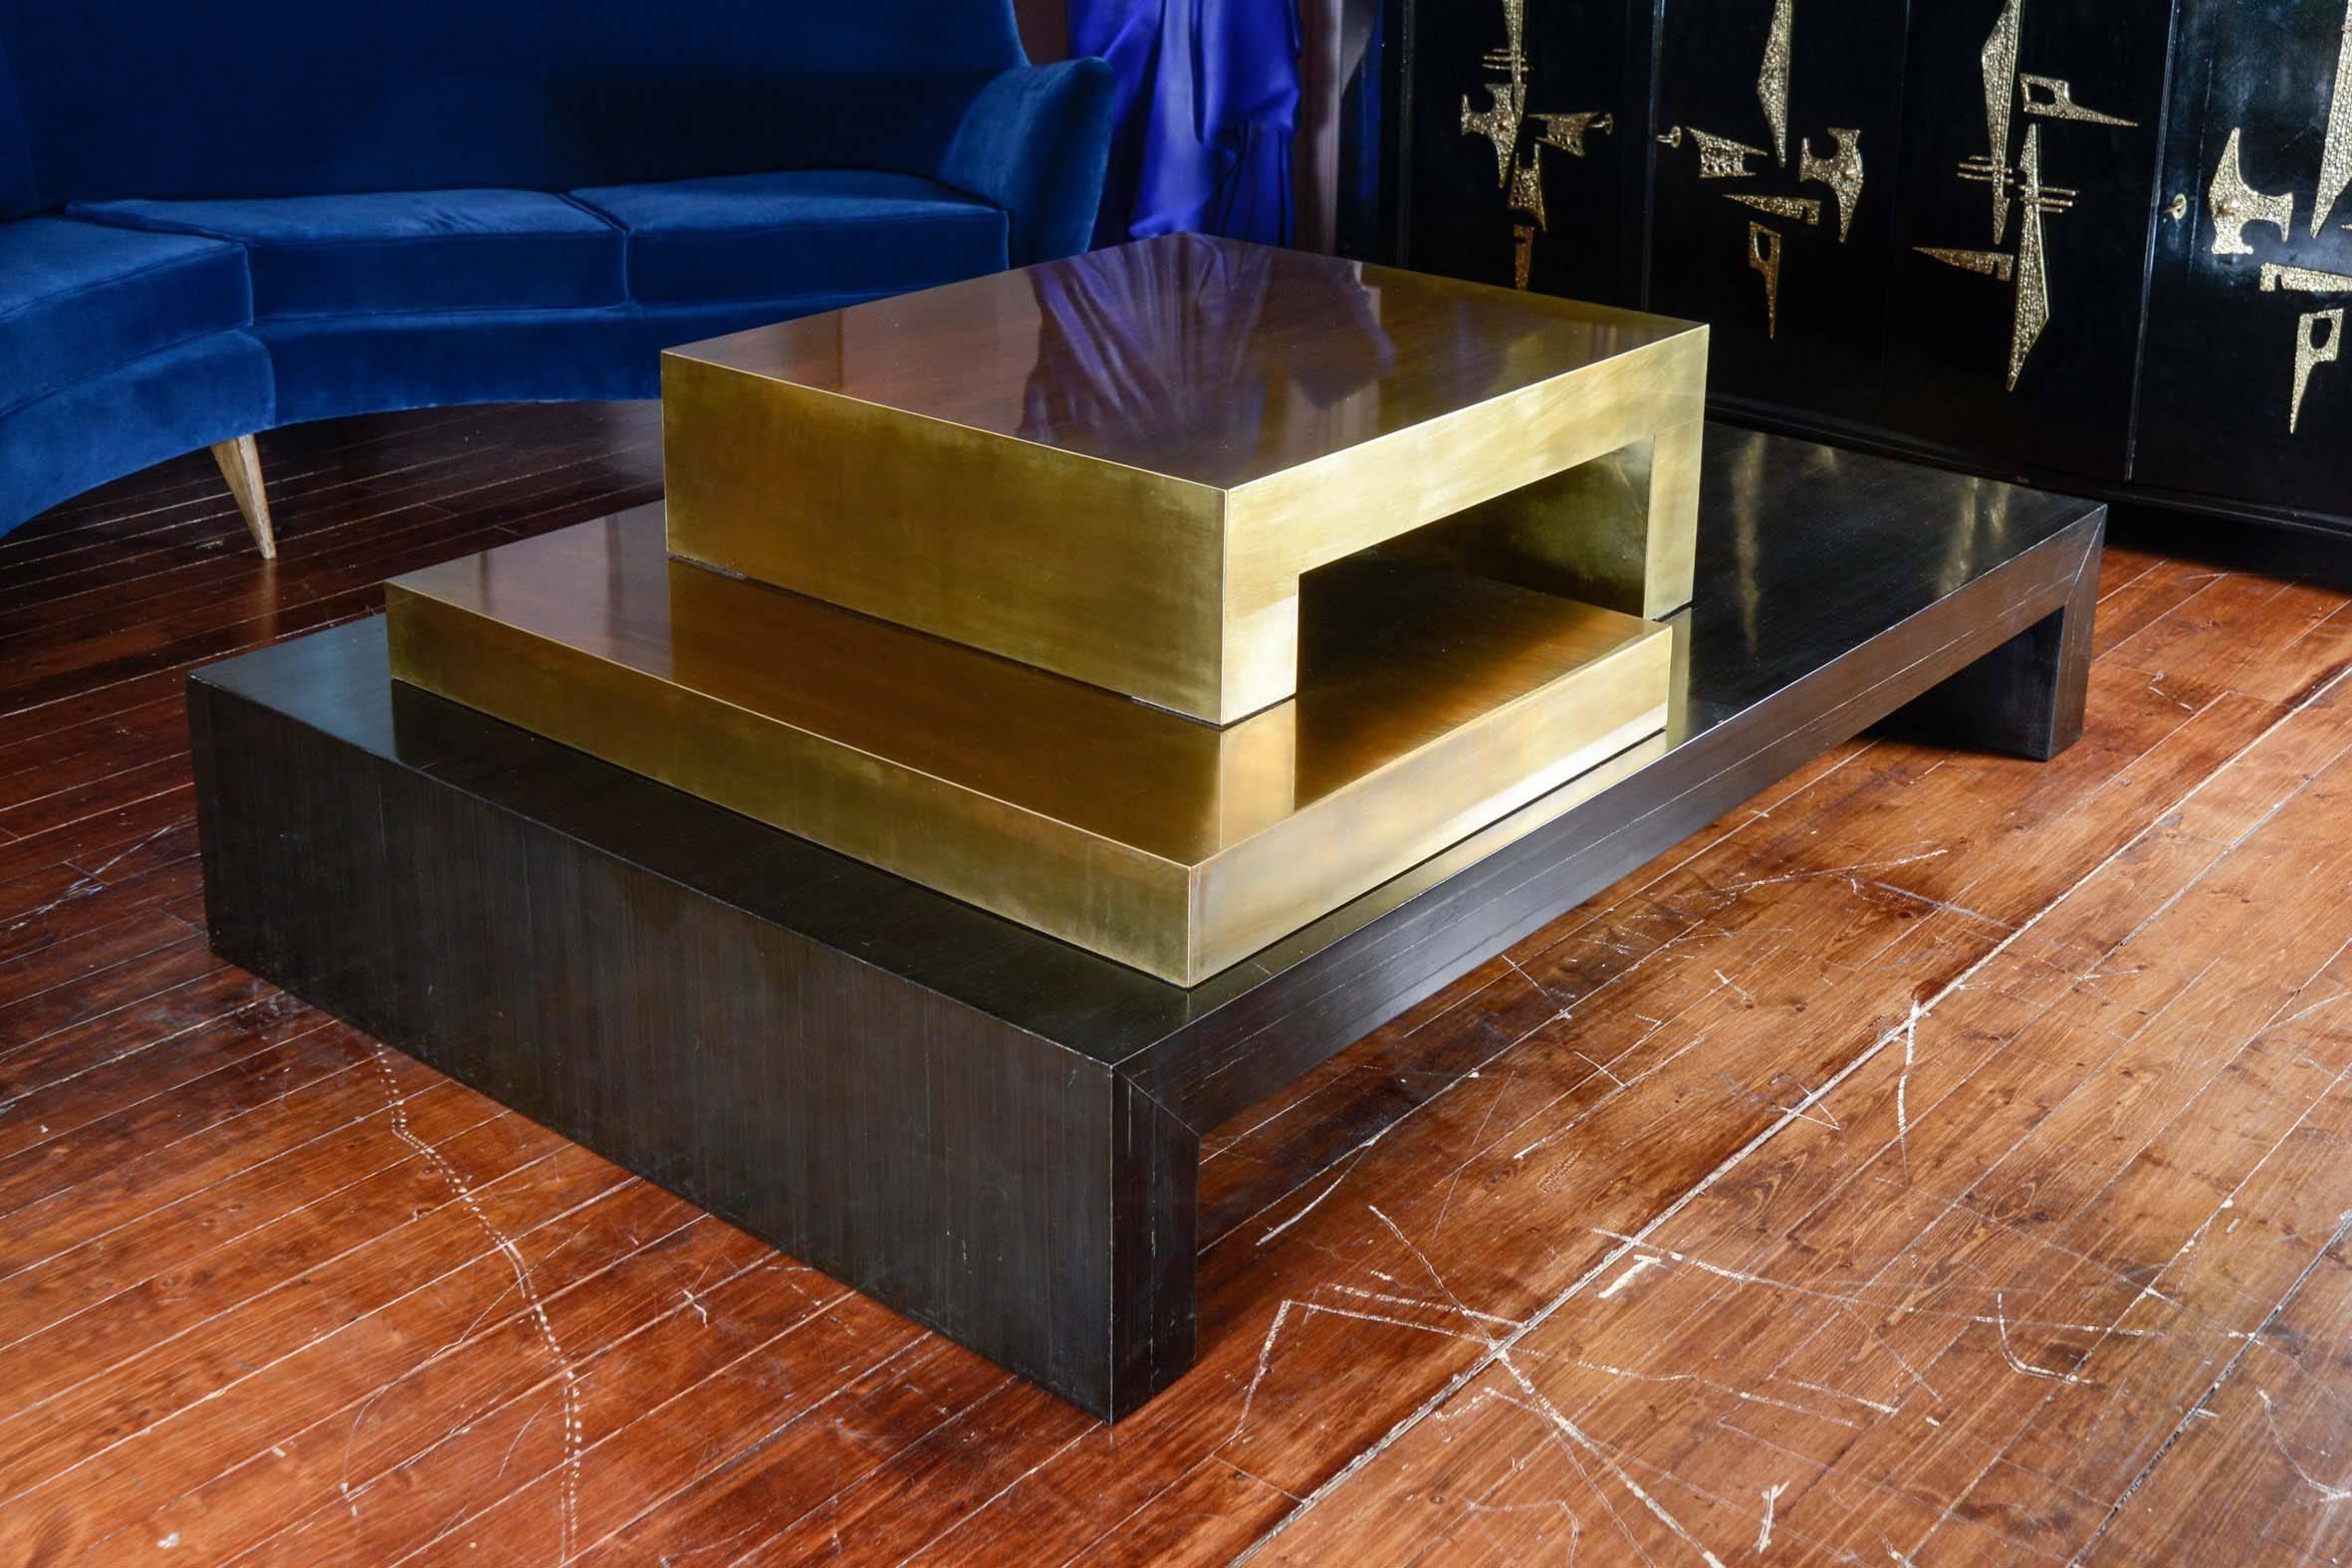 Low table in Macassar ebony and two brass modules, signed by the artist Serio.